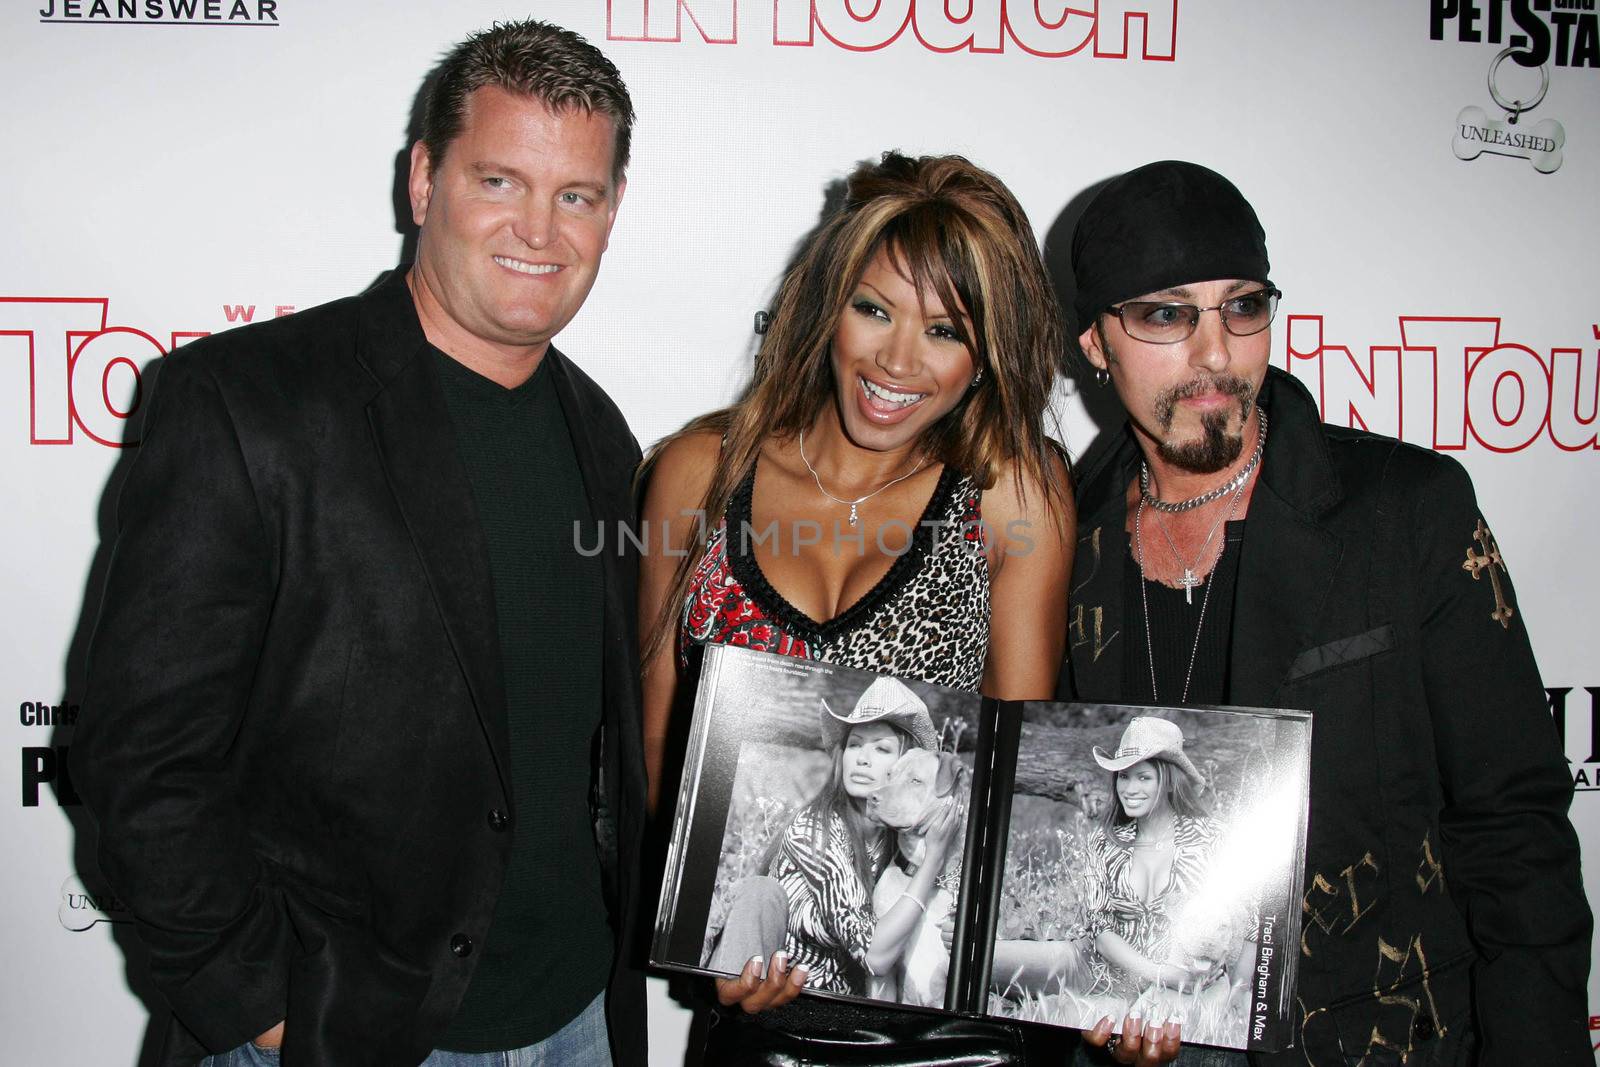 John Edward Yarbrough with Traci Bingham and Christopher Amerouso at the In Touch Presents Pets And Their Stars Party, Cabana Club, Hollywood, CA 09-21-05